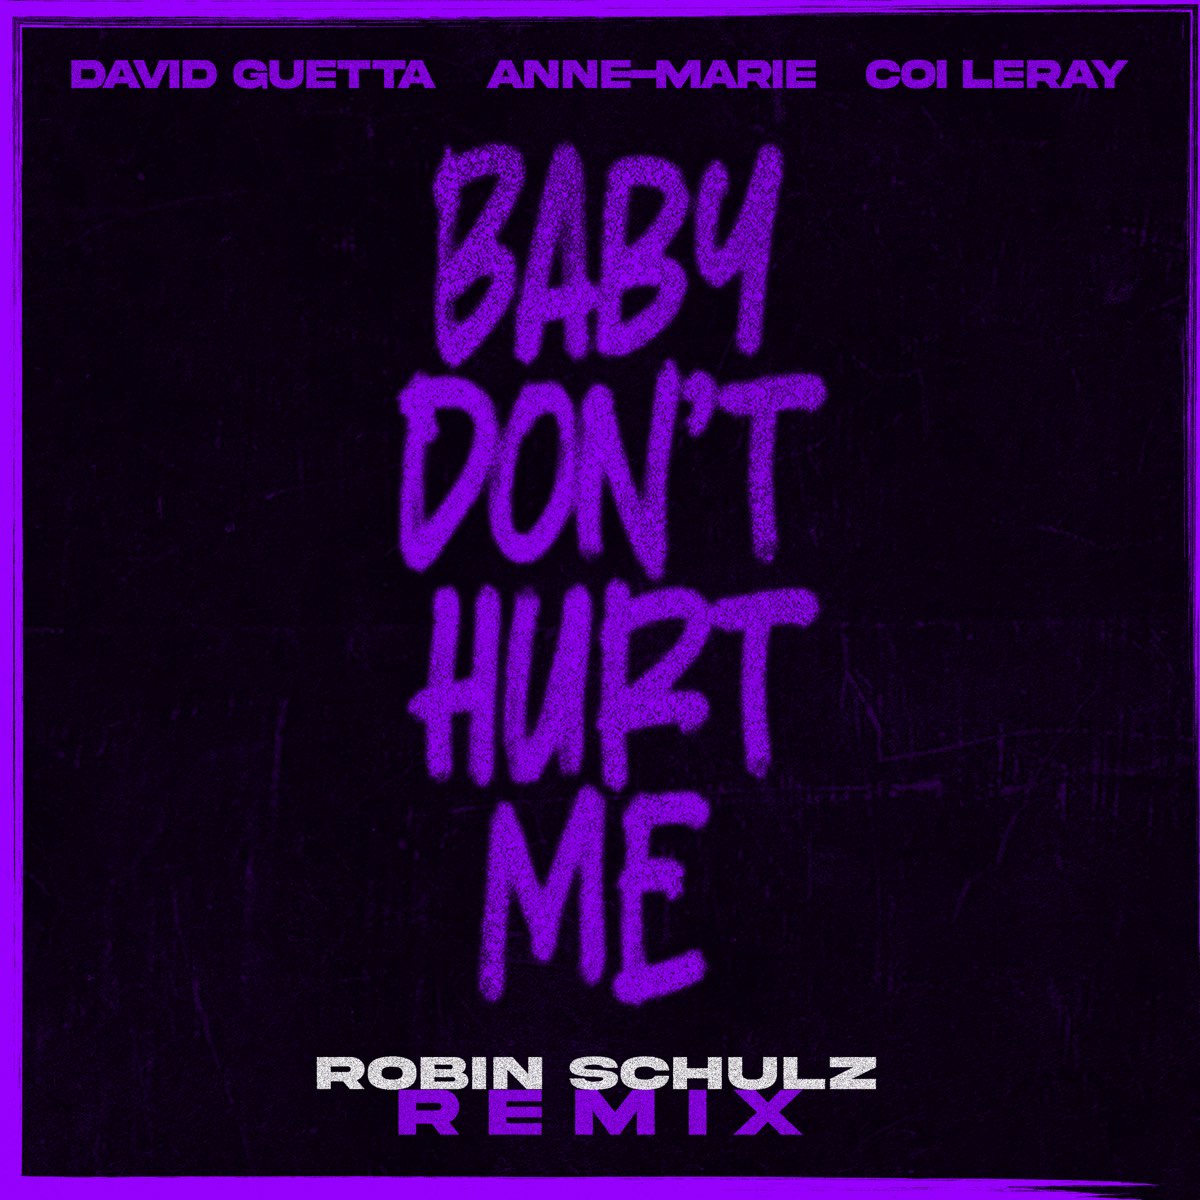 David guetta anne marie coi. Baby don't hurt me David Guetta. David Guetta, Anne-Marie, coi Leray - Baby don’t hurt me. David Guetta/Sofi Tukker/Anne-Marie/coi Leray - Baby don't hurt me (Sofi Tukker Remix). Baby font hurt me фото.